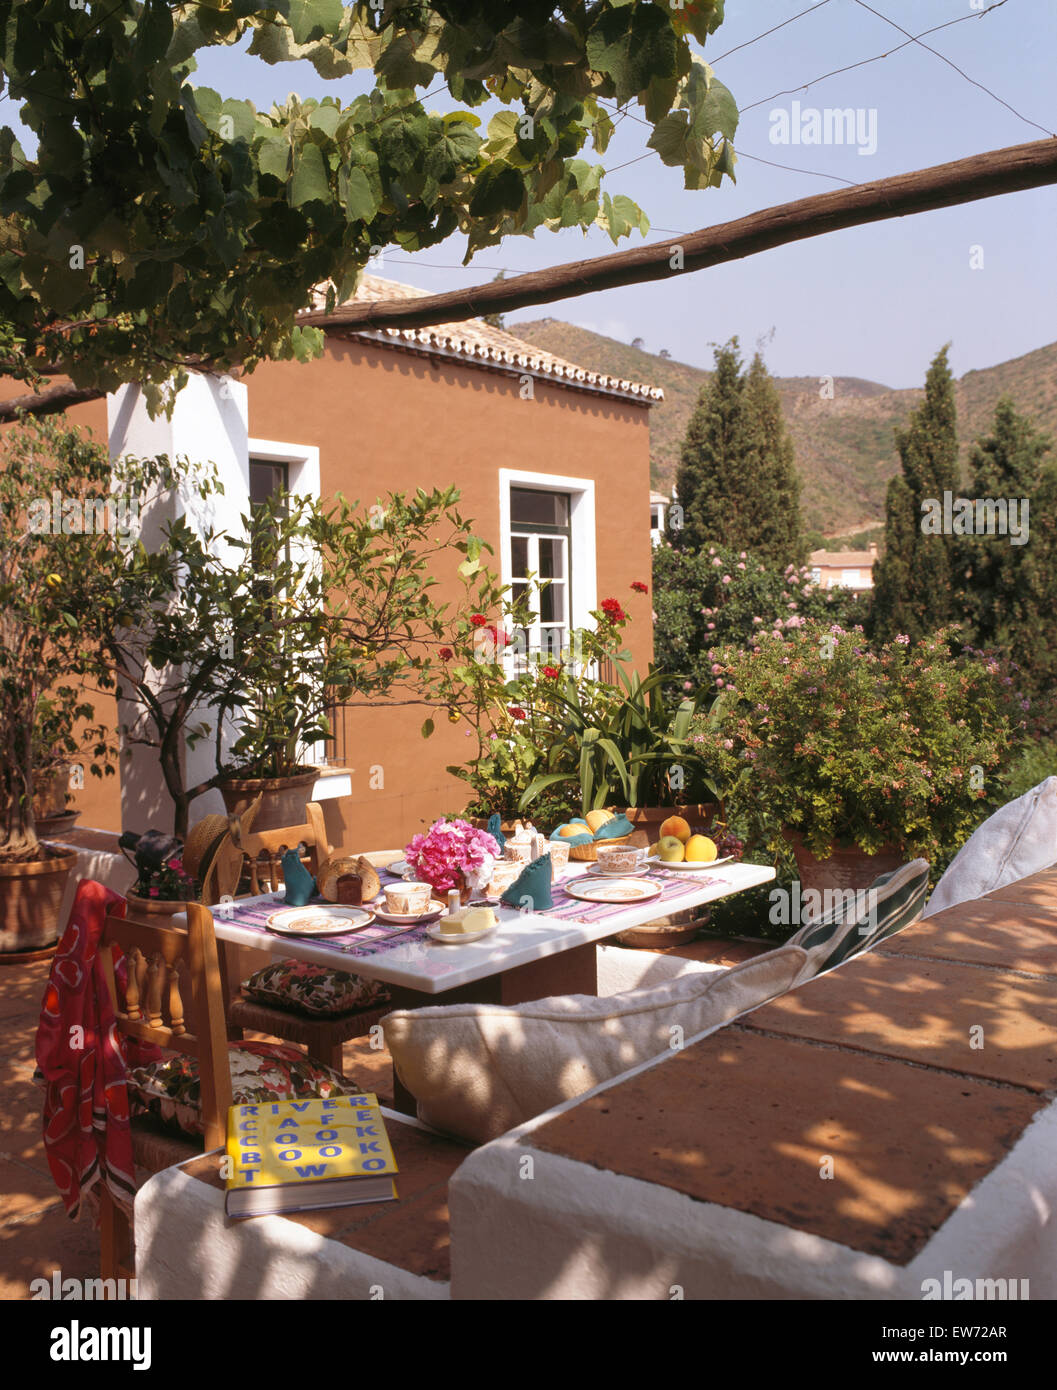 Table set for lunch on terrace of villa in southern Spain Stock Photo